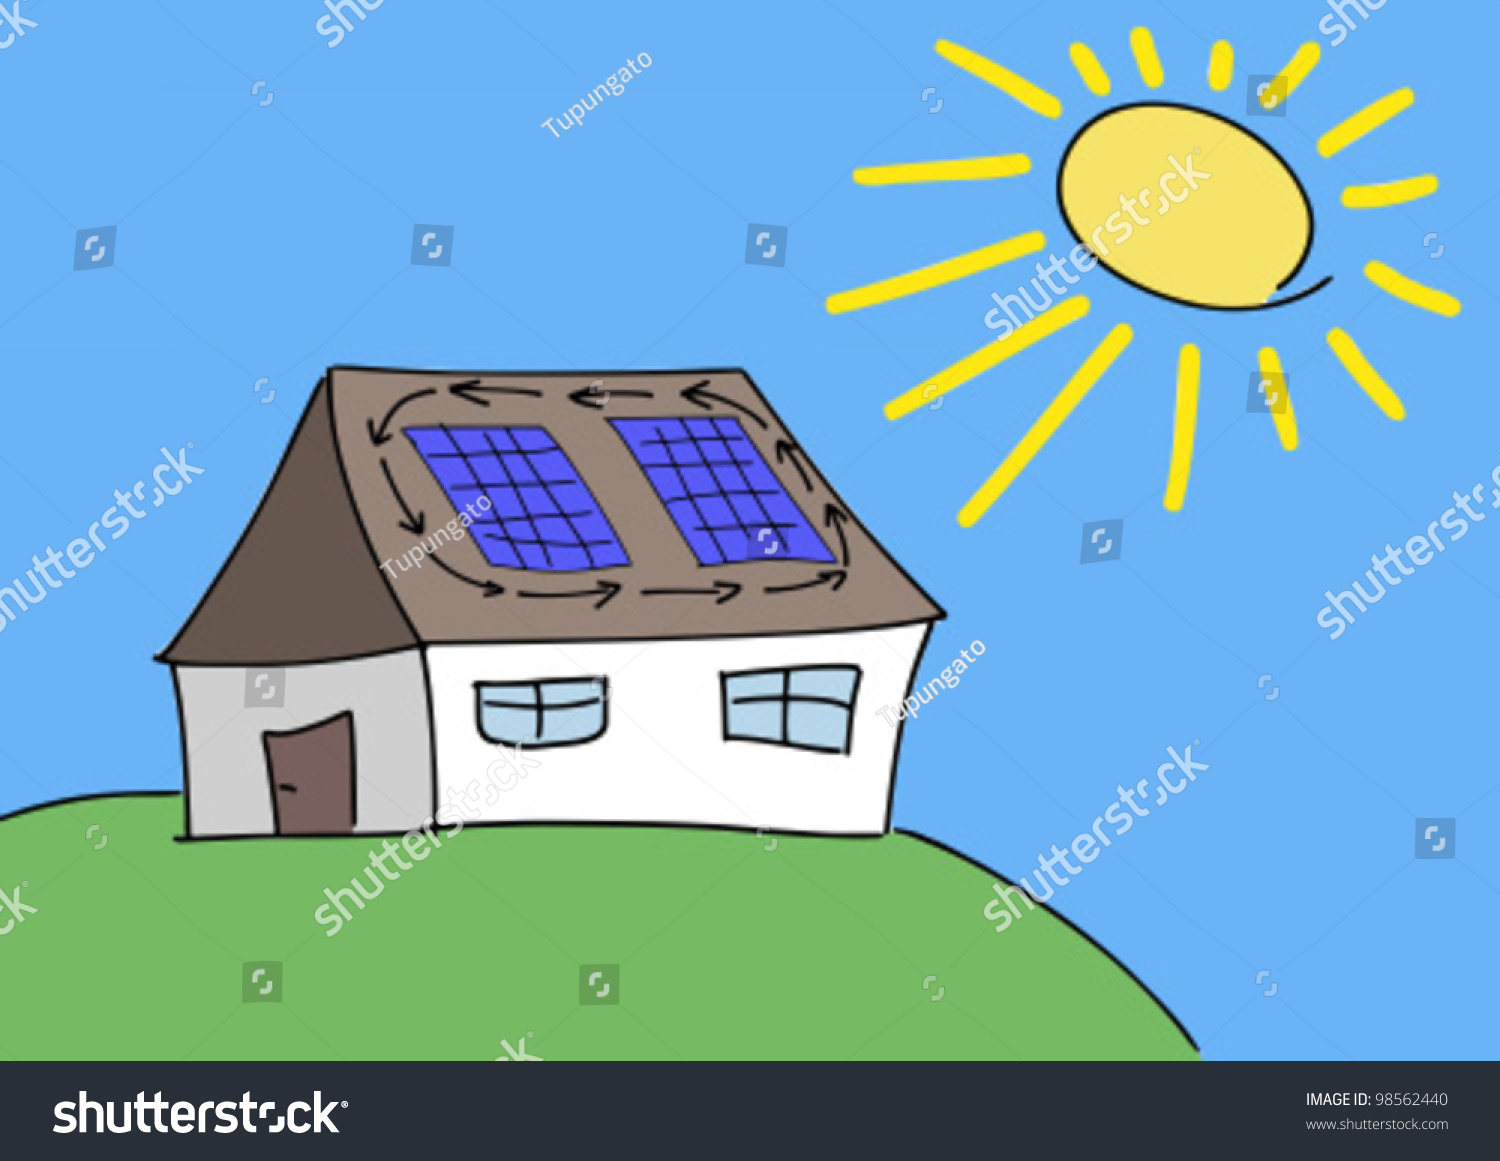 Doodle Drawing Solar Energy Concept. Renewable Sun Power With